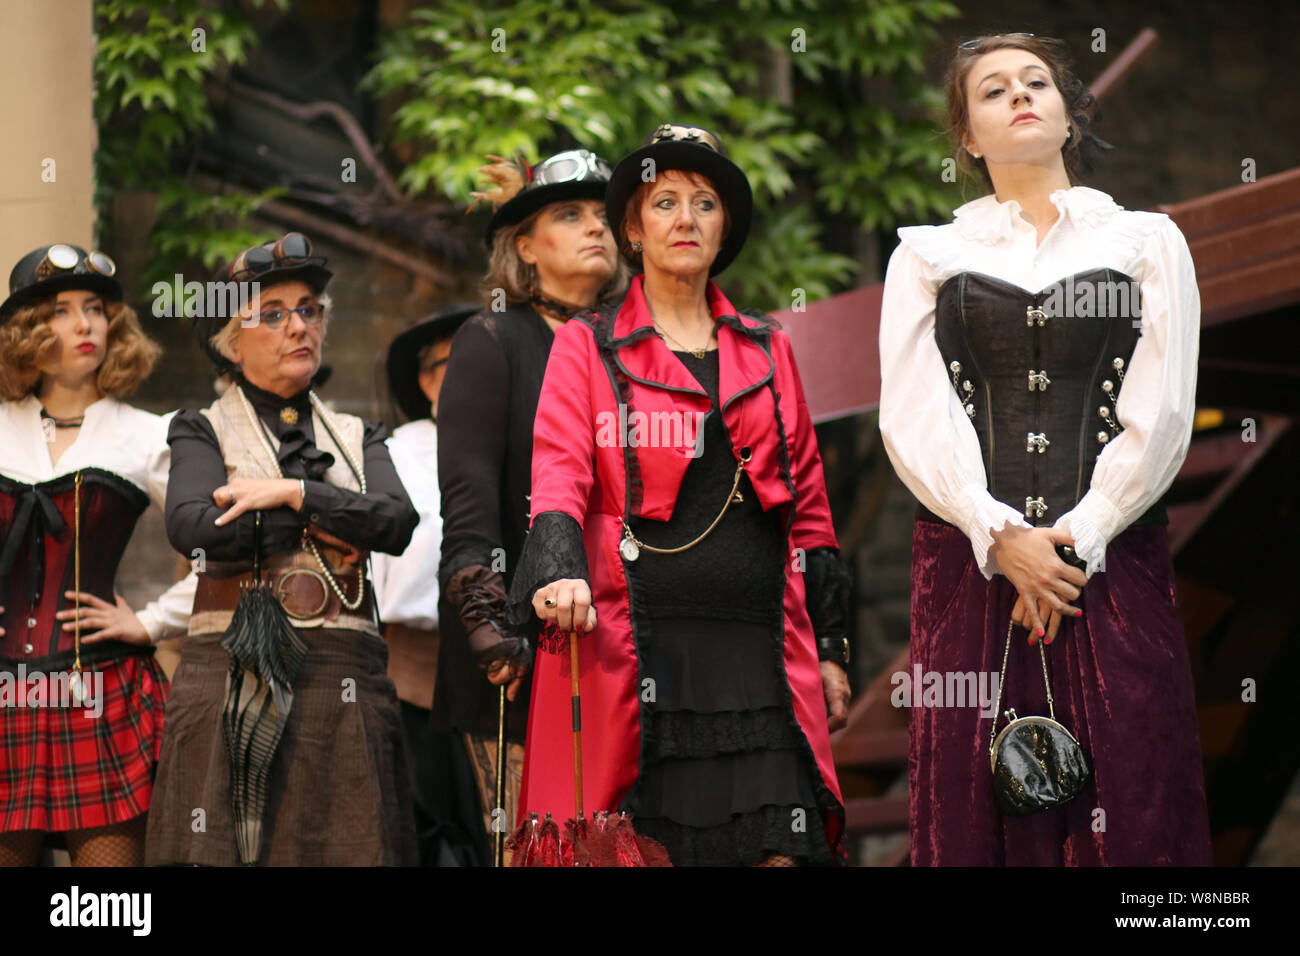 Wernigerode, Germany. 02nd Aug, 2019. Performers rehearse for the opera performance 'Romeo and Juliet' in the courtyard of Wernigerode Castle. The play will premiere on 09 August. Bellini's opera premiered in Venice in 1830, the first performance outside Italy took place a year later in Dresden. During the festival at Schloss Wernigerode, there are also plans for changing concerts, a final concert and a children's and family programme until 1 September. Credit: Matthias Bein/dpa-Zentralbild/ZB/dpa/Alamy Live News Stock Photo